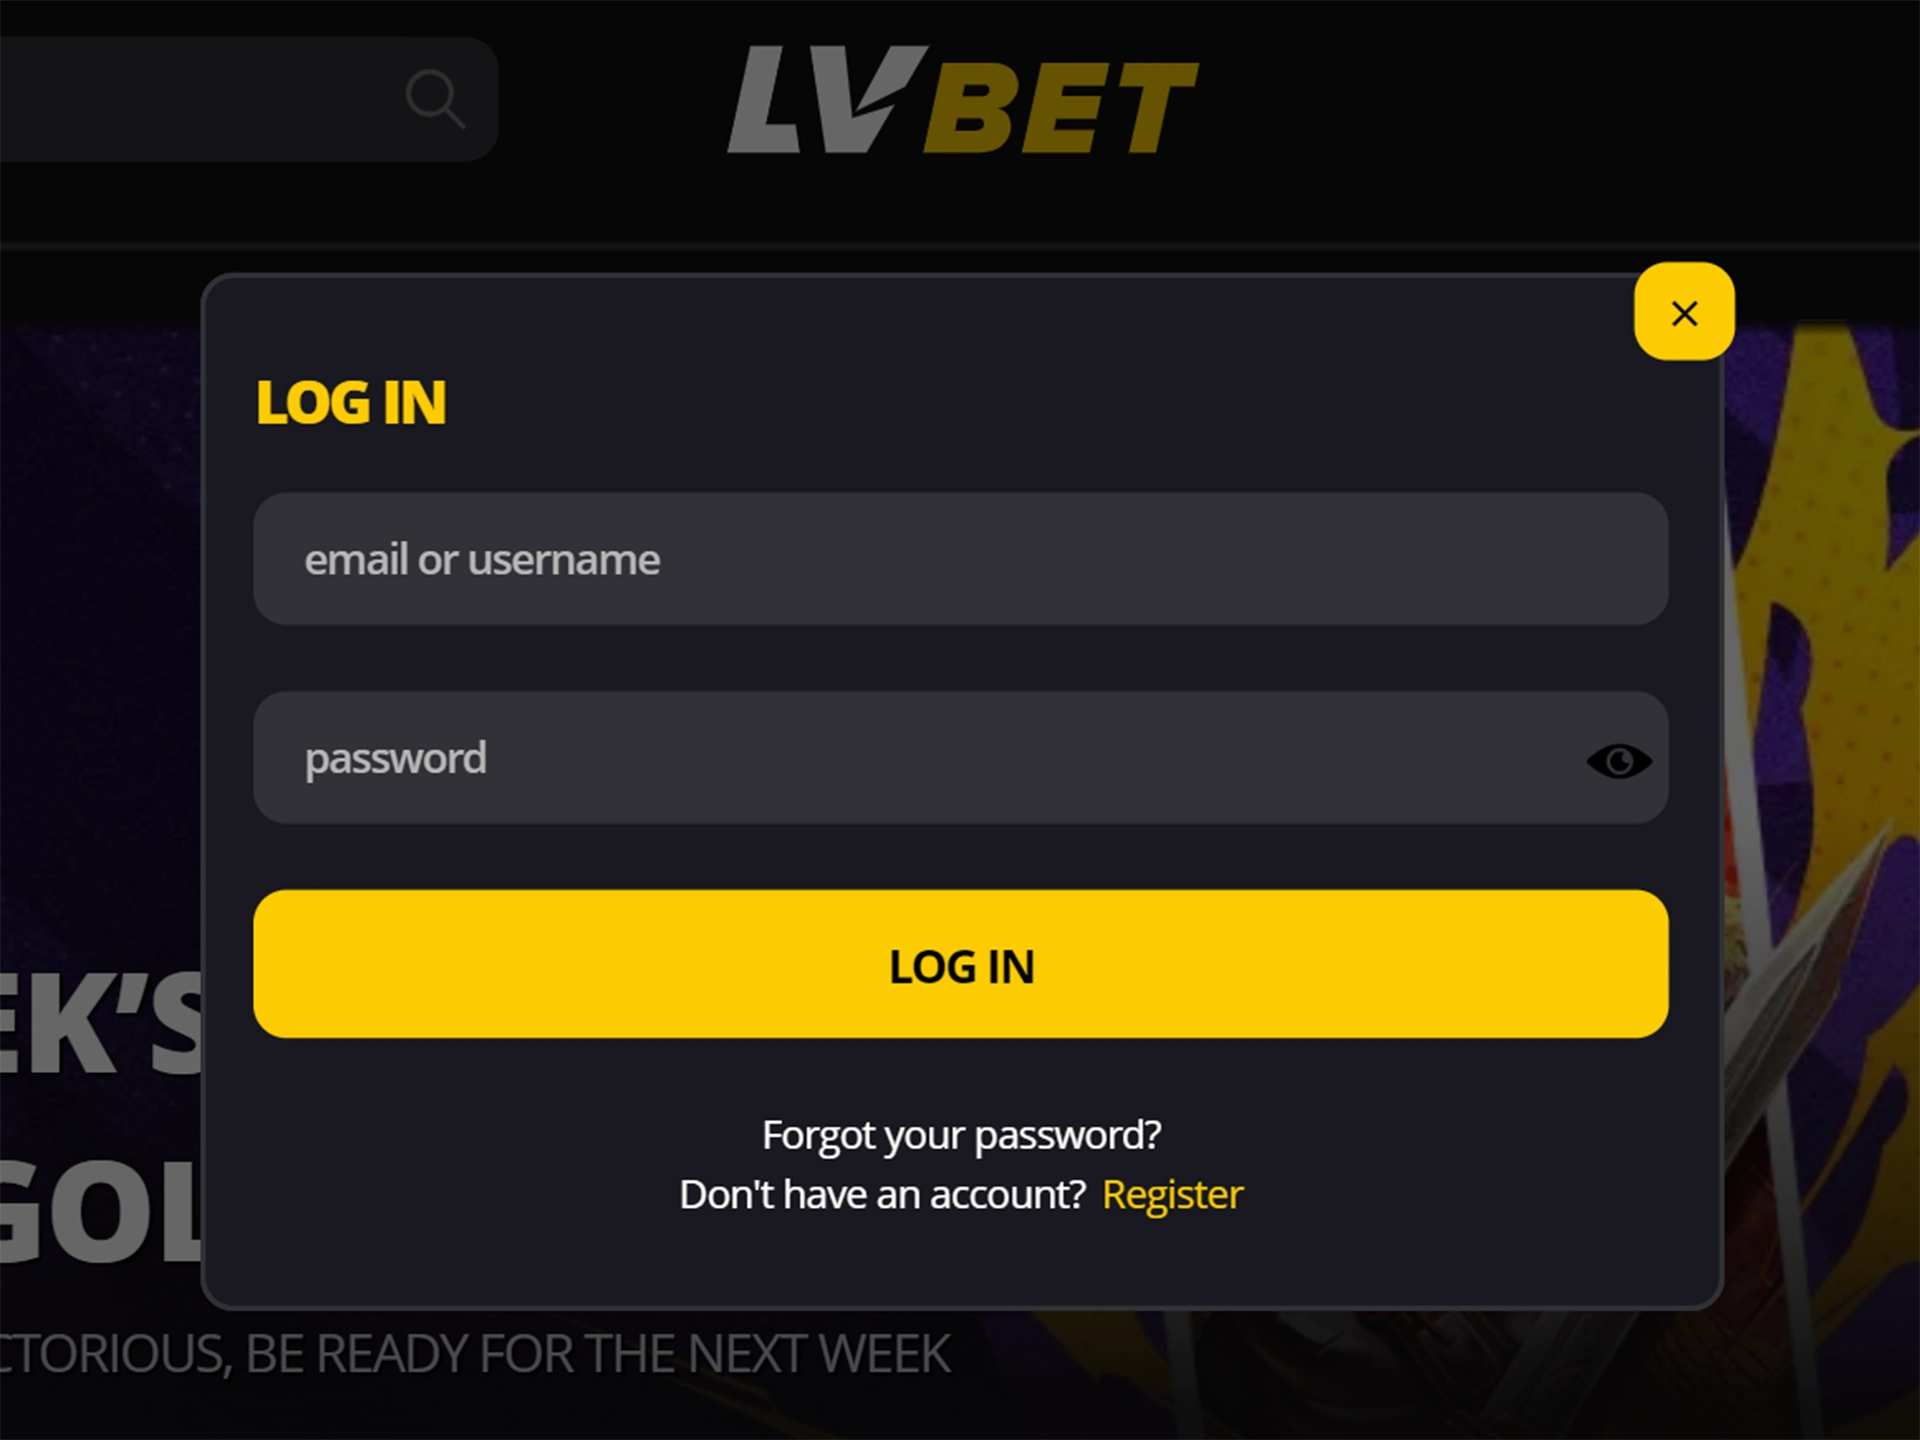 Log in to your LV Bet account and start playing.